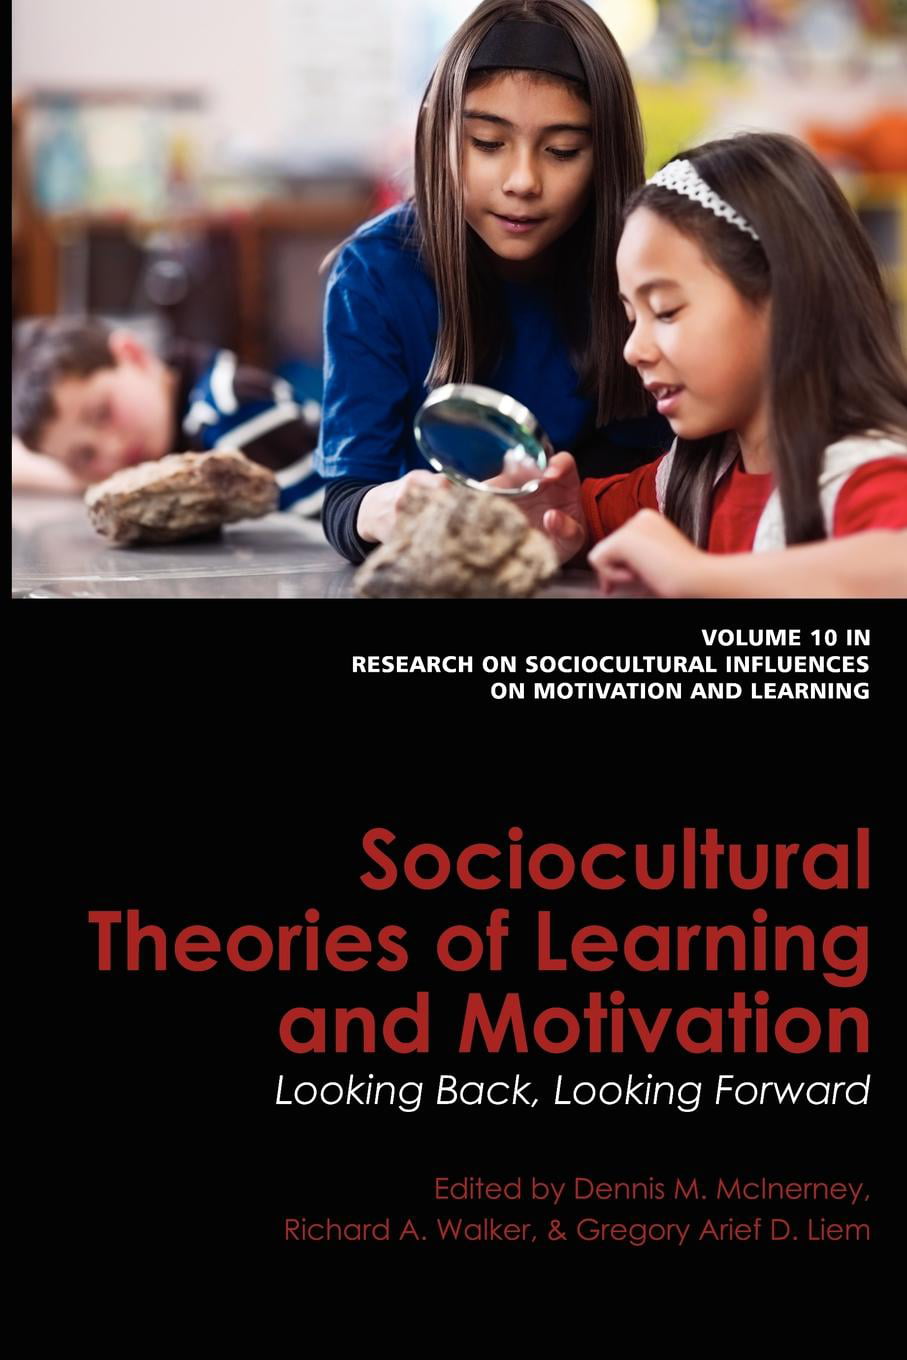 research reading strategies to promote sociocultural development